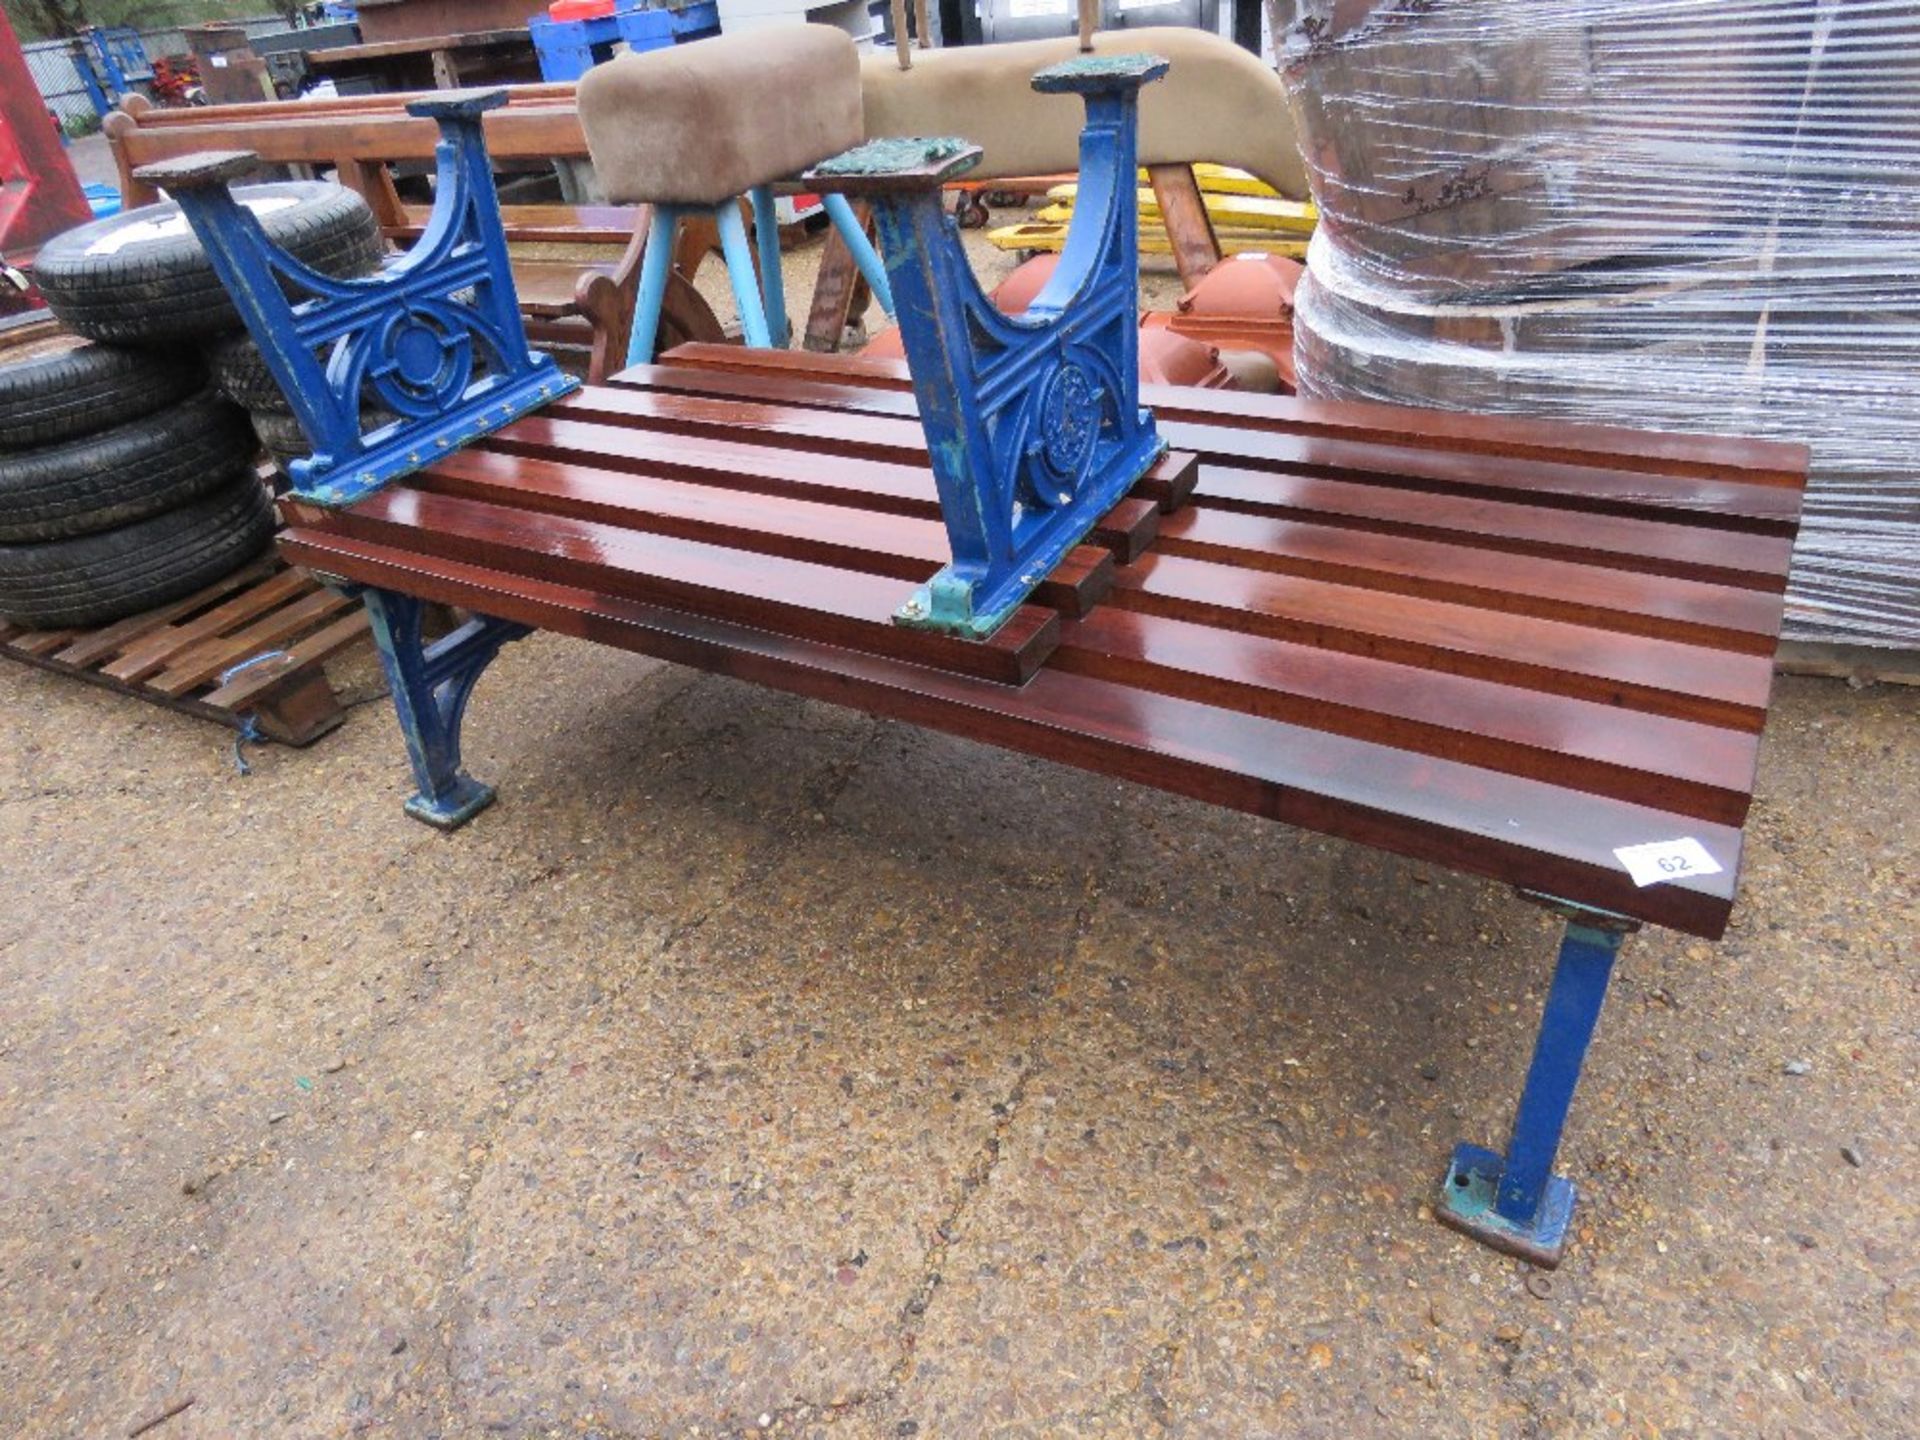 2 X WOODEN TOPPED BENCHES WITH CAST ENDS 1.2M AND 1.8M LENGTH APPROX, HEAVY DUTY CONSTRUCTION. - Image 5 of 5